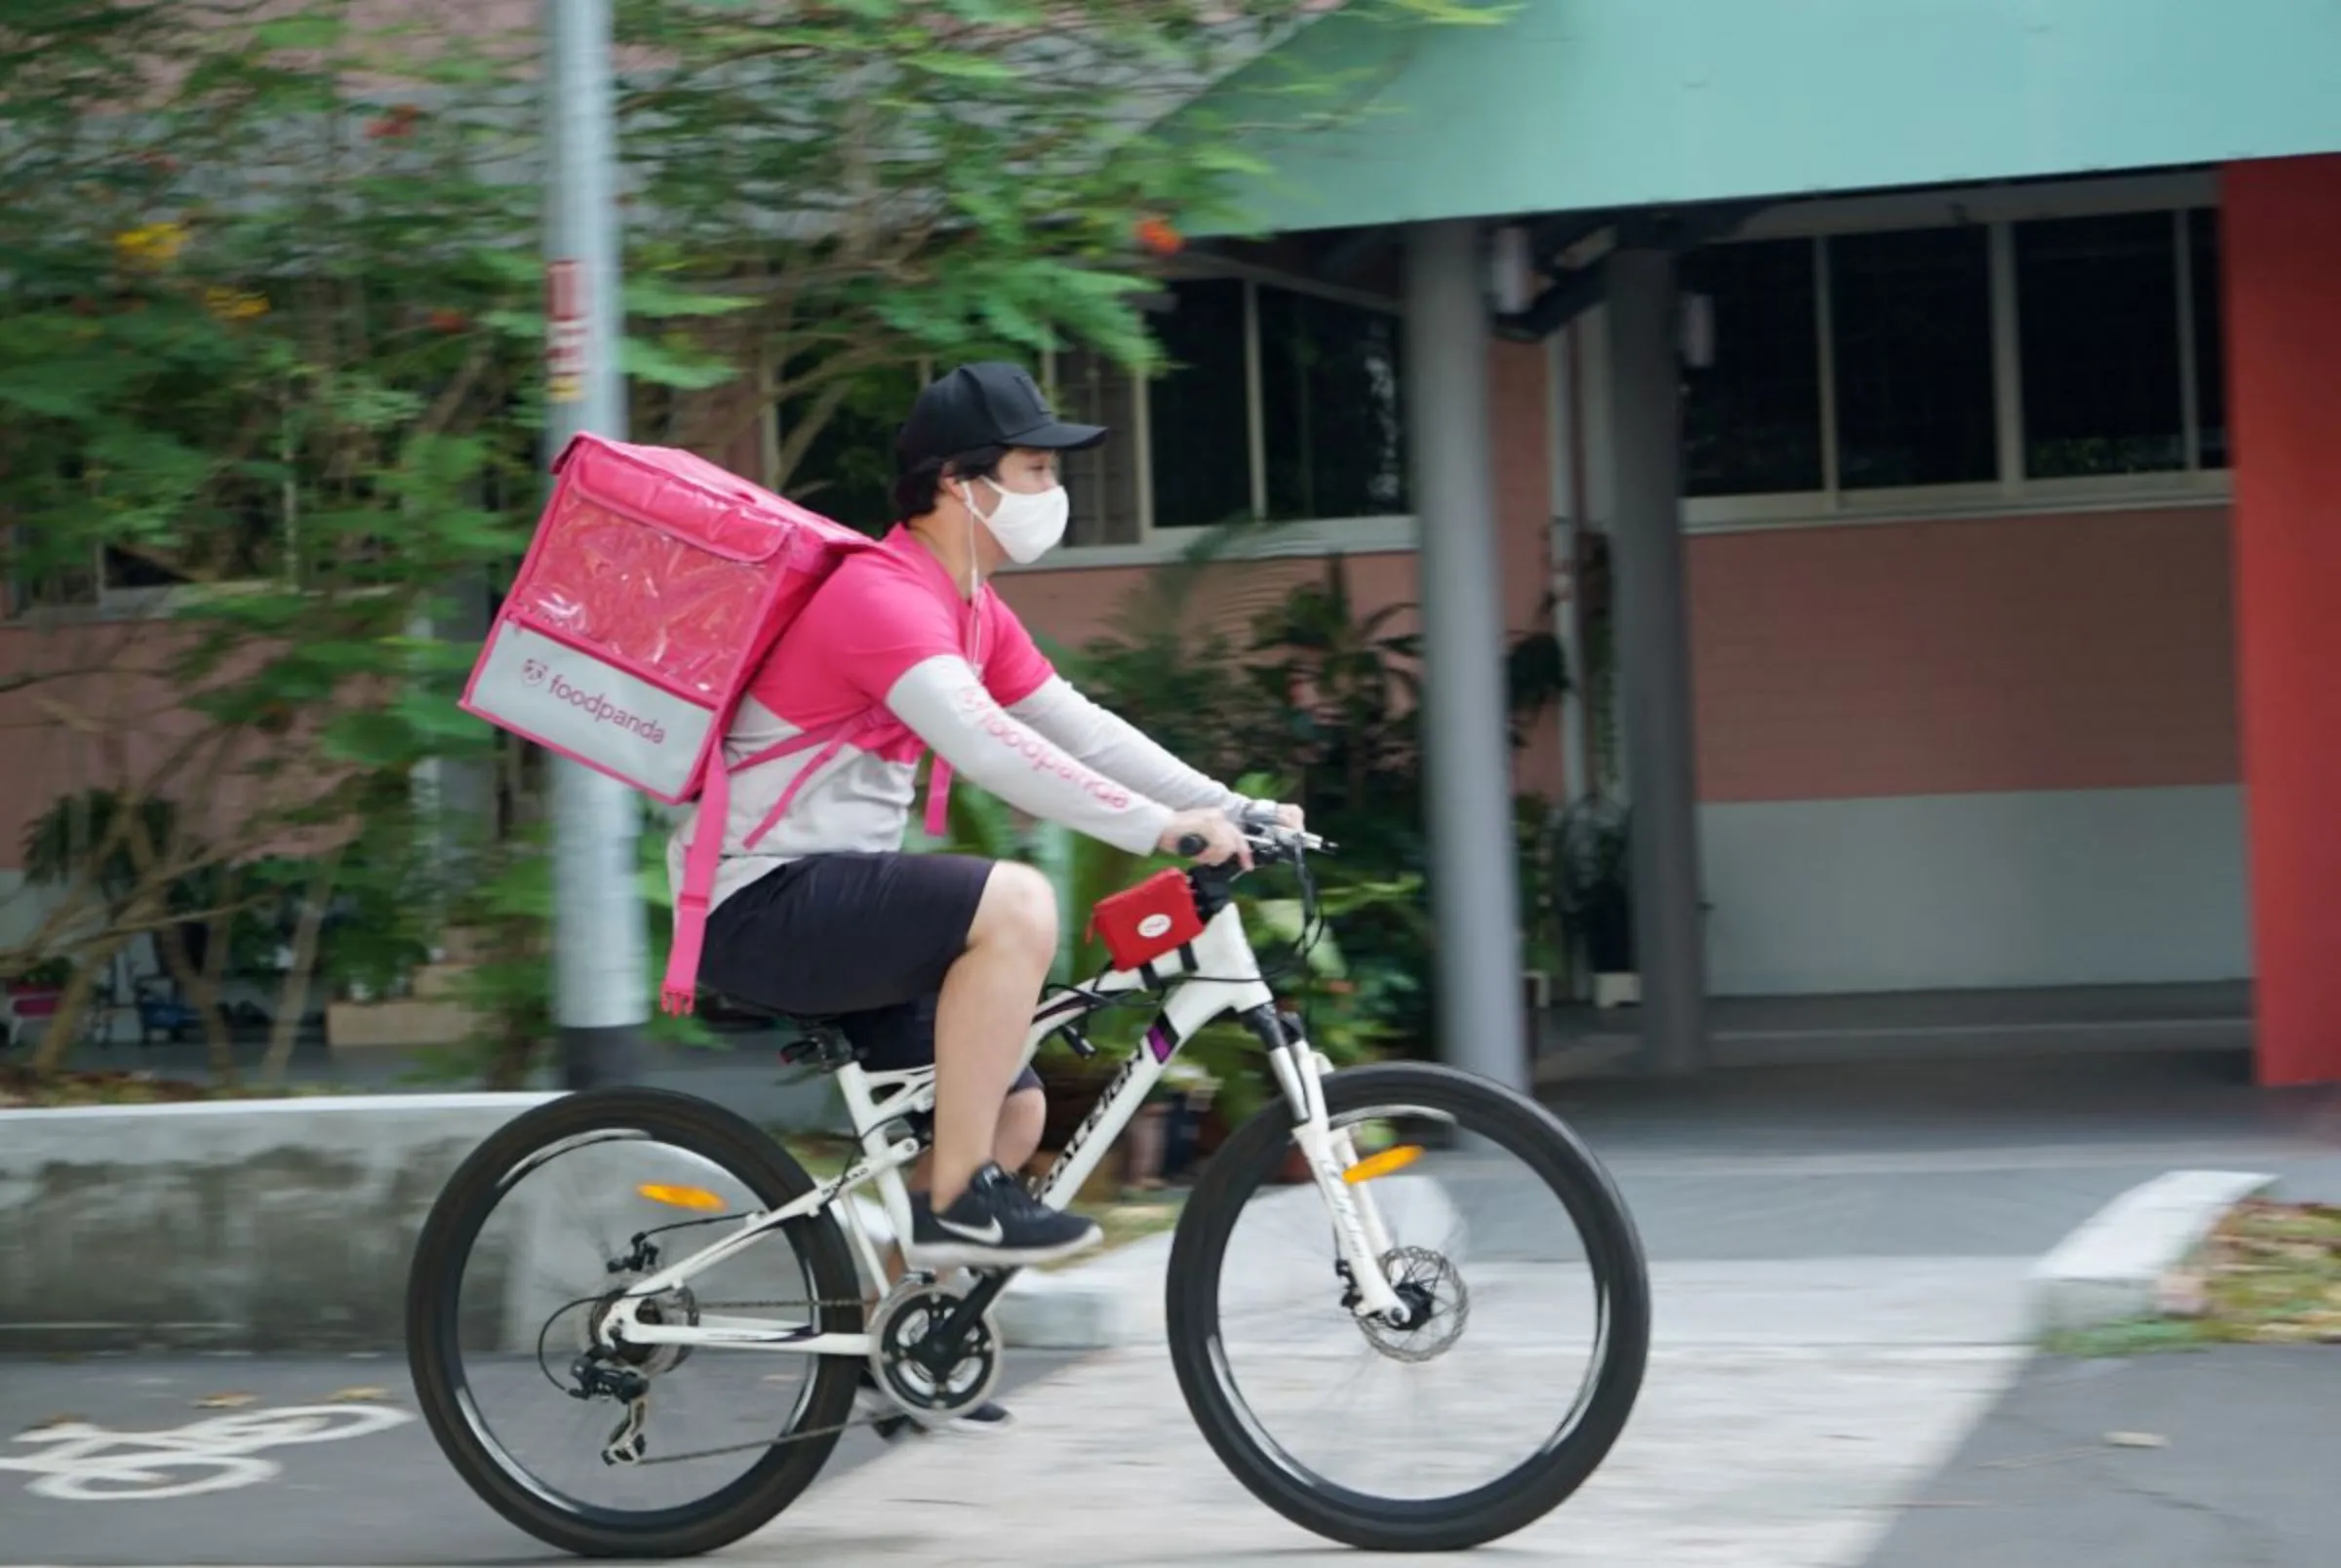 A delivery driver makes a food delivery in Singapore March 9, 2021. REUTERS/Joseph Campbell